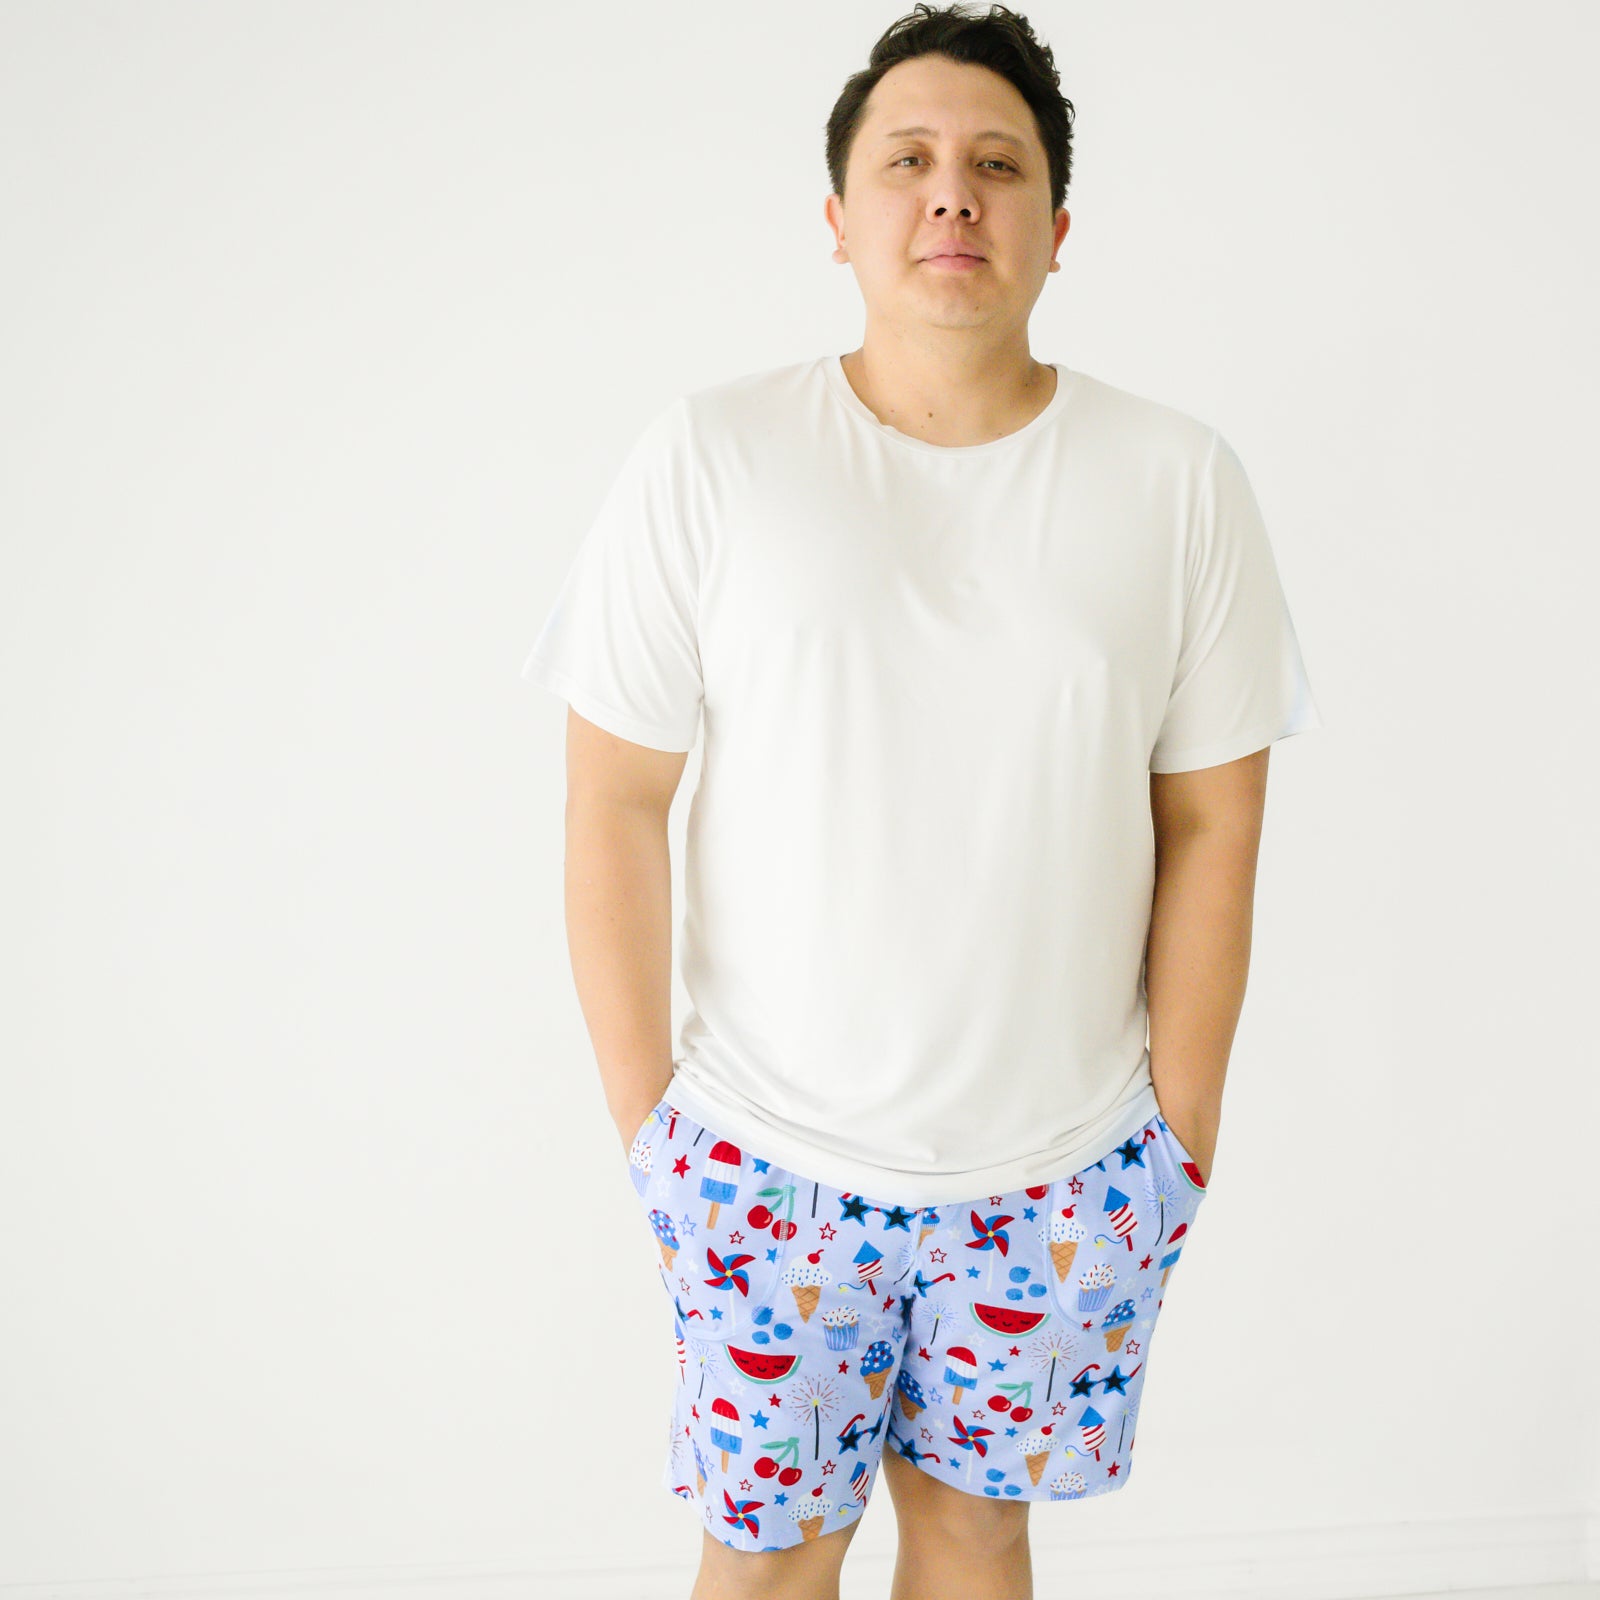 Close up image of a man wearing Stars Stripes and Sweets printed men's pj shorts paired with a men's bright white pj top